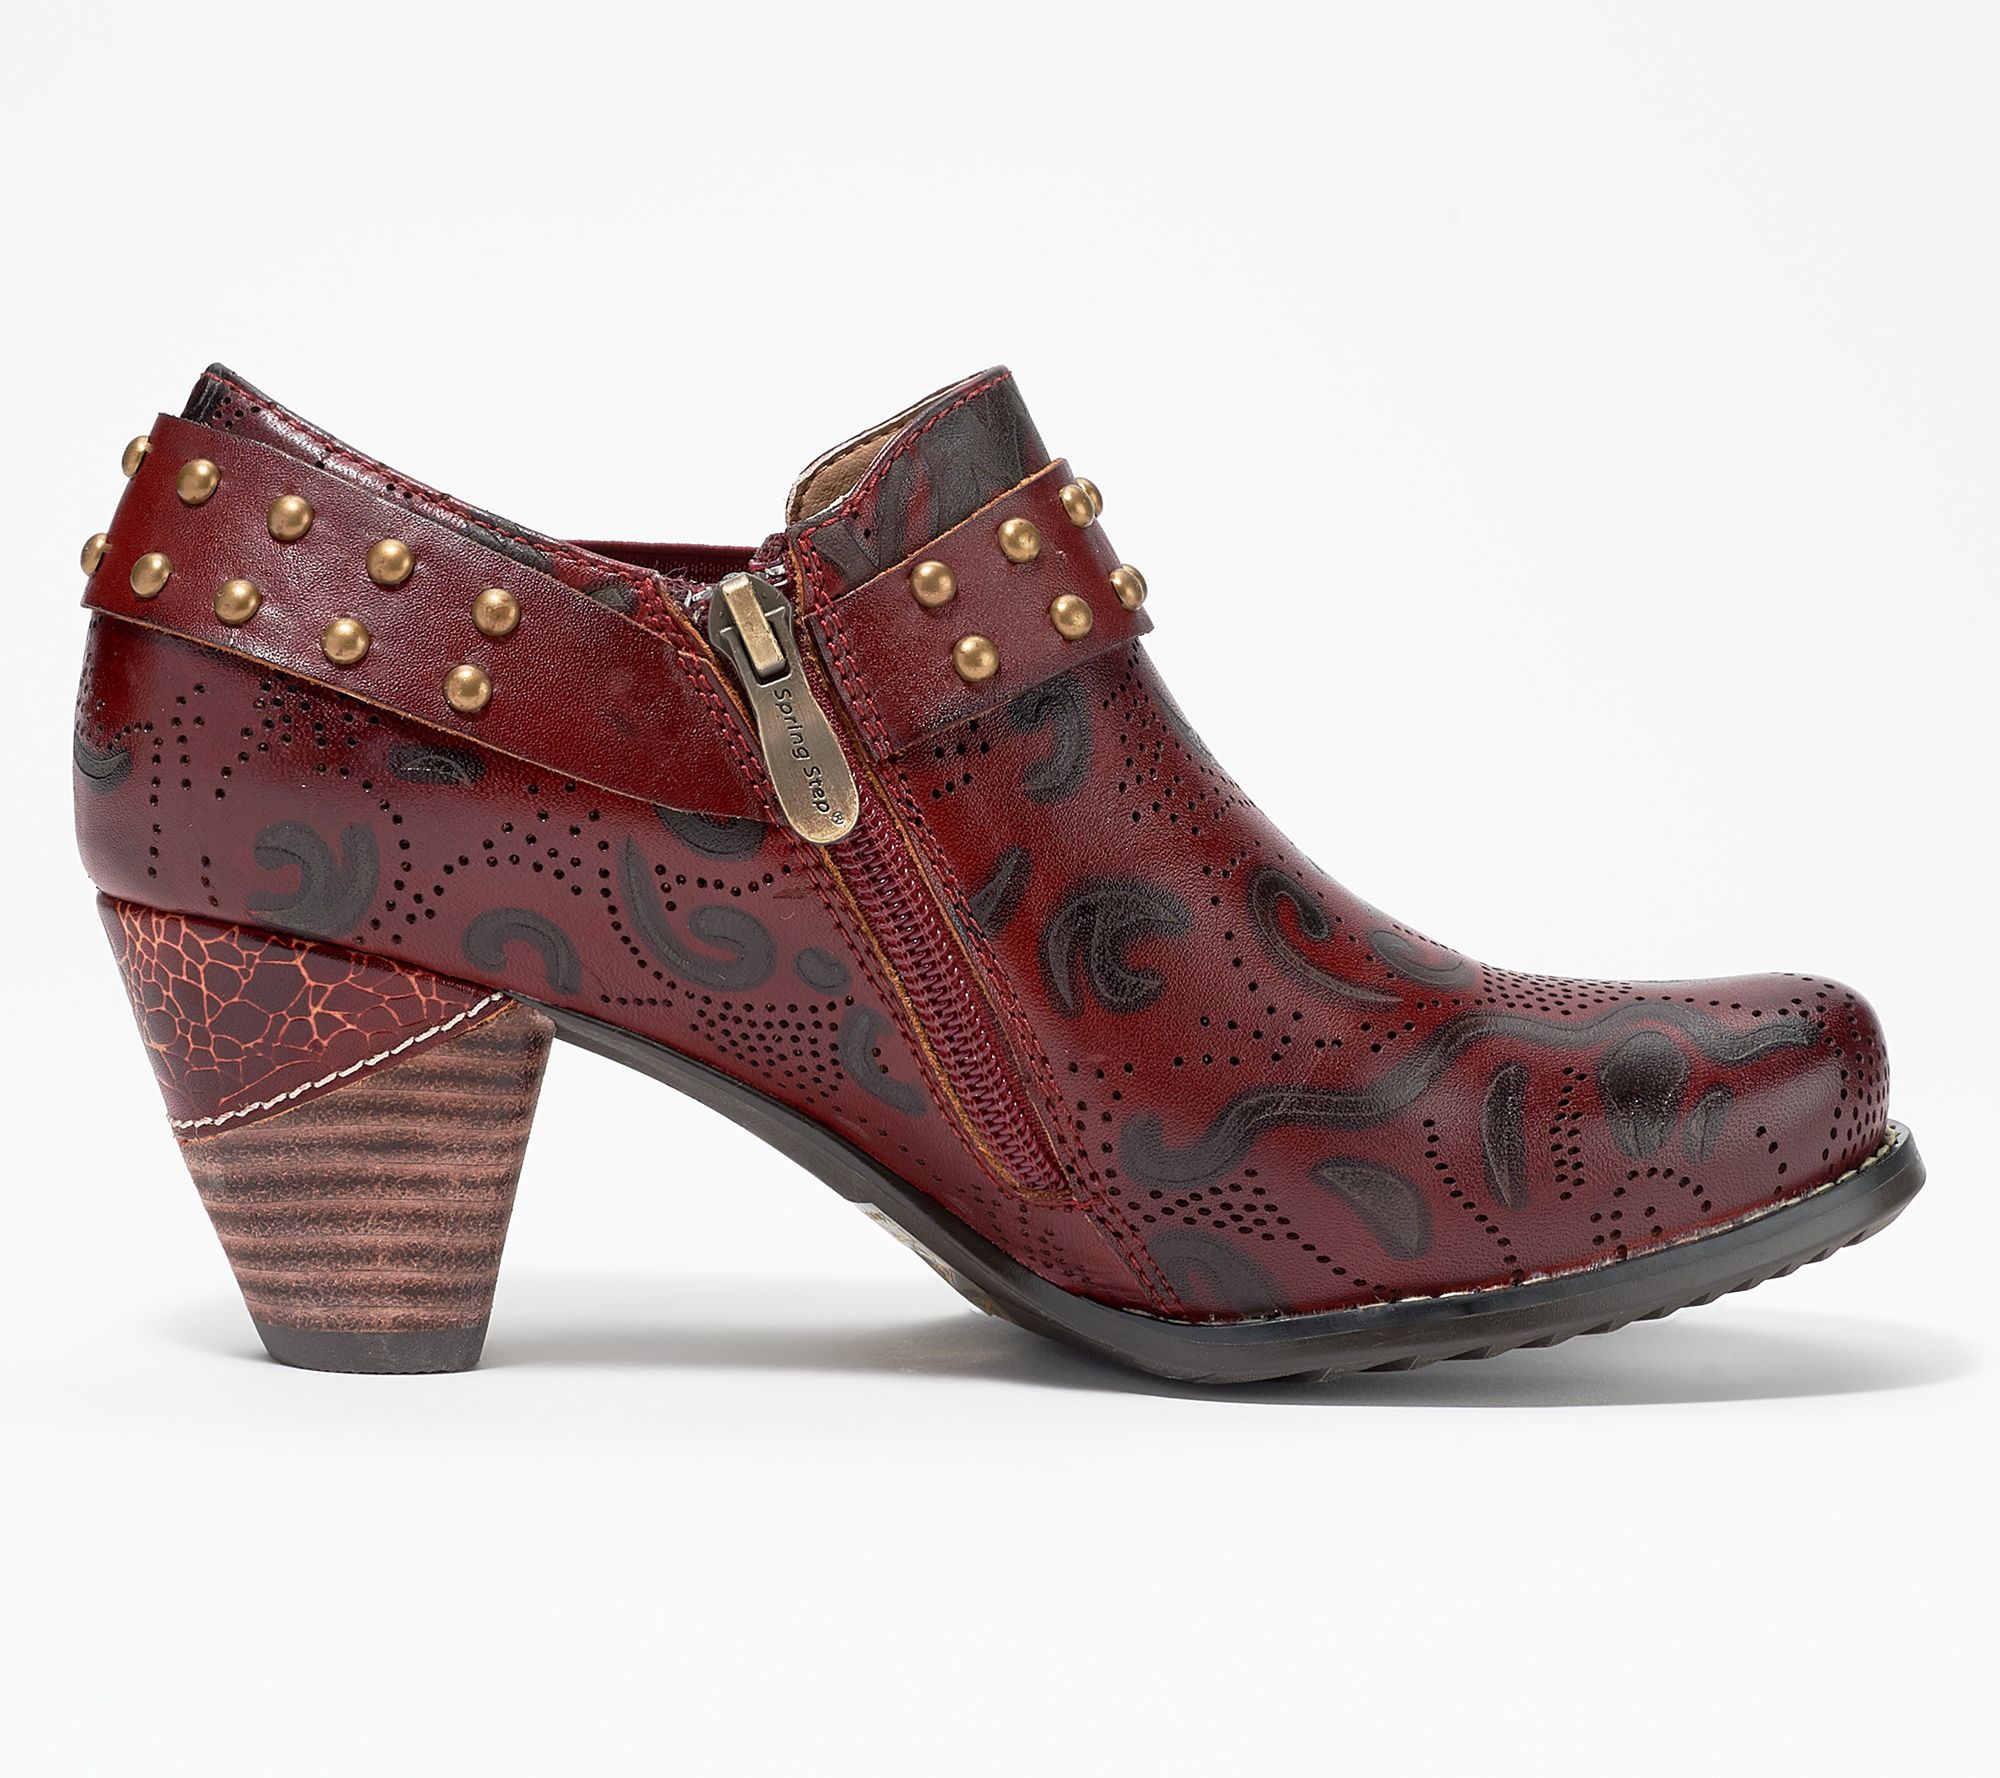 L'Artiste by Spring Step Leather Booties - Kacielou - QVC.com